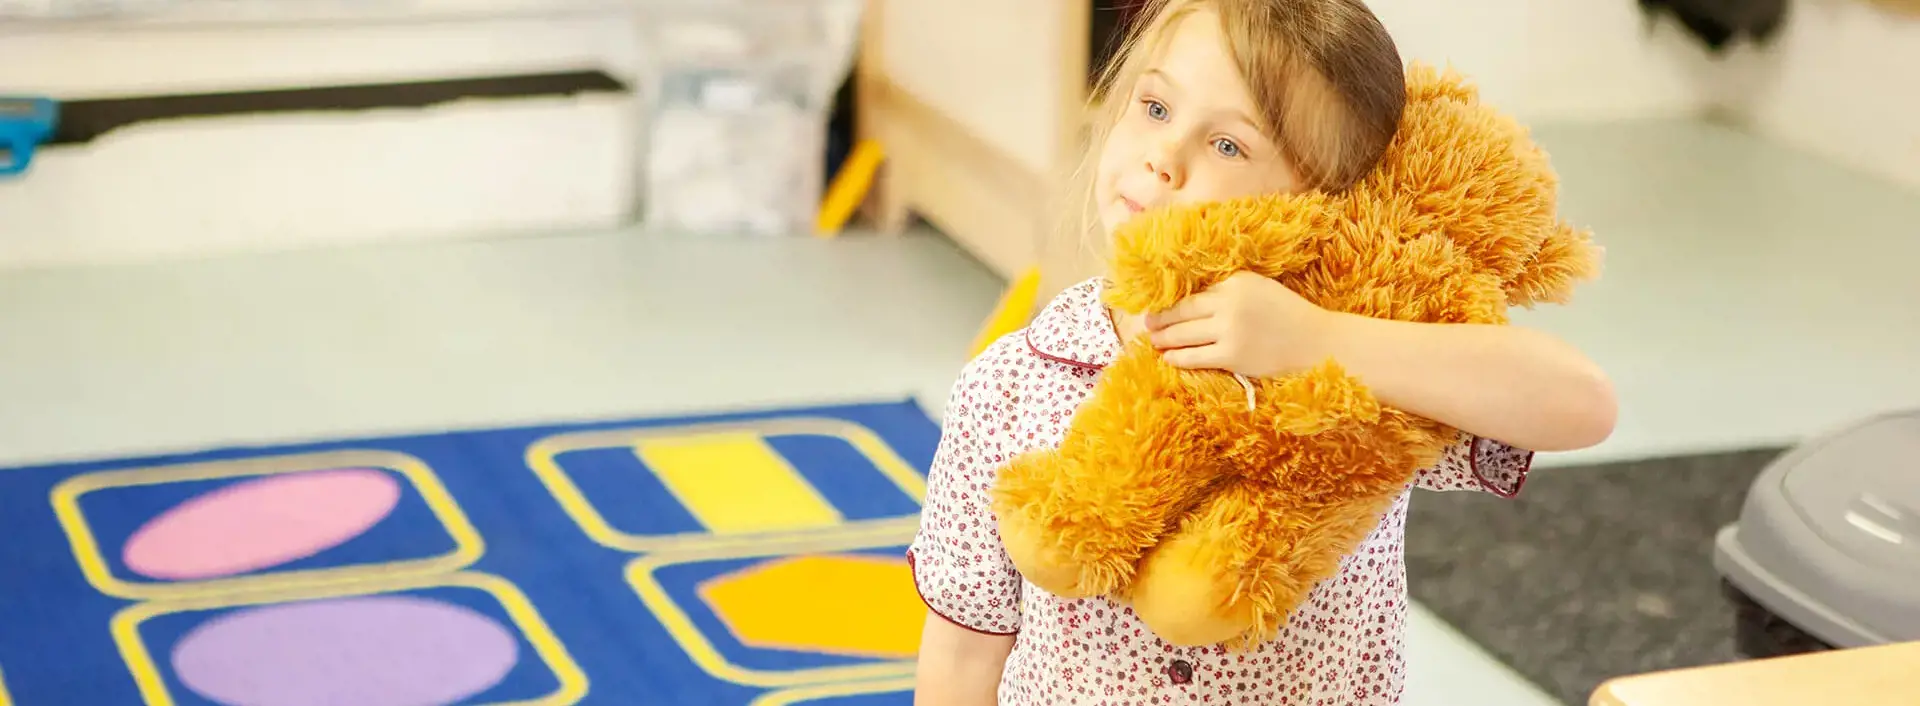 Young pupil hugging a teddy bear